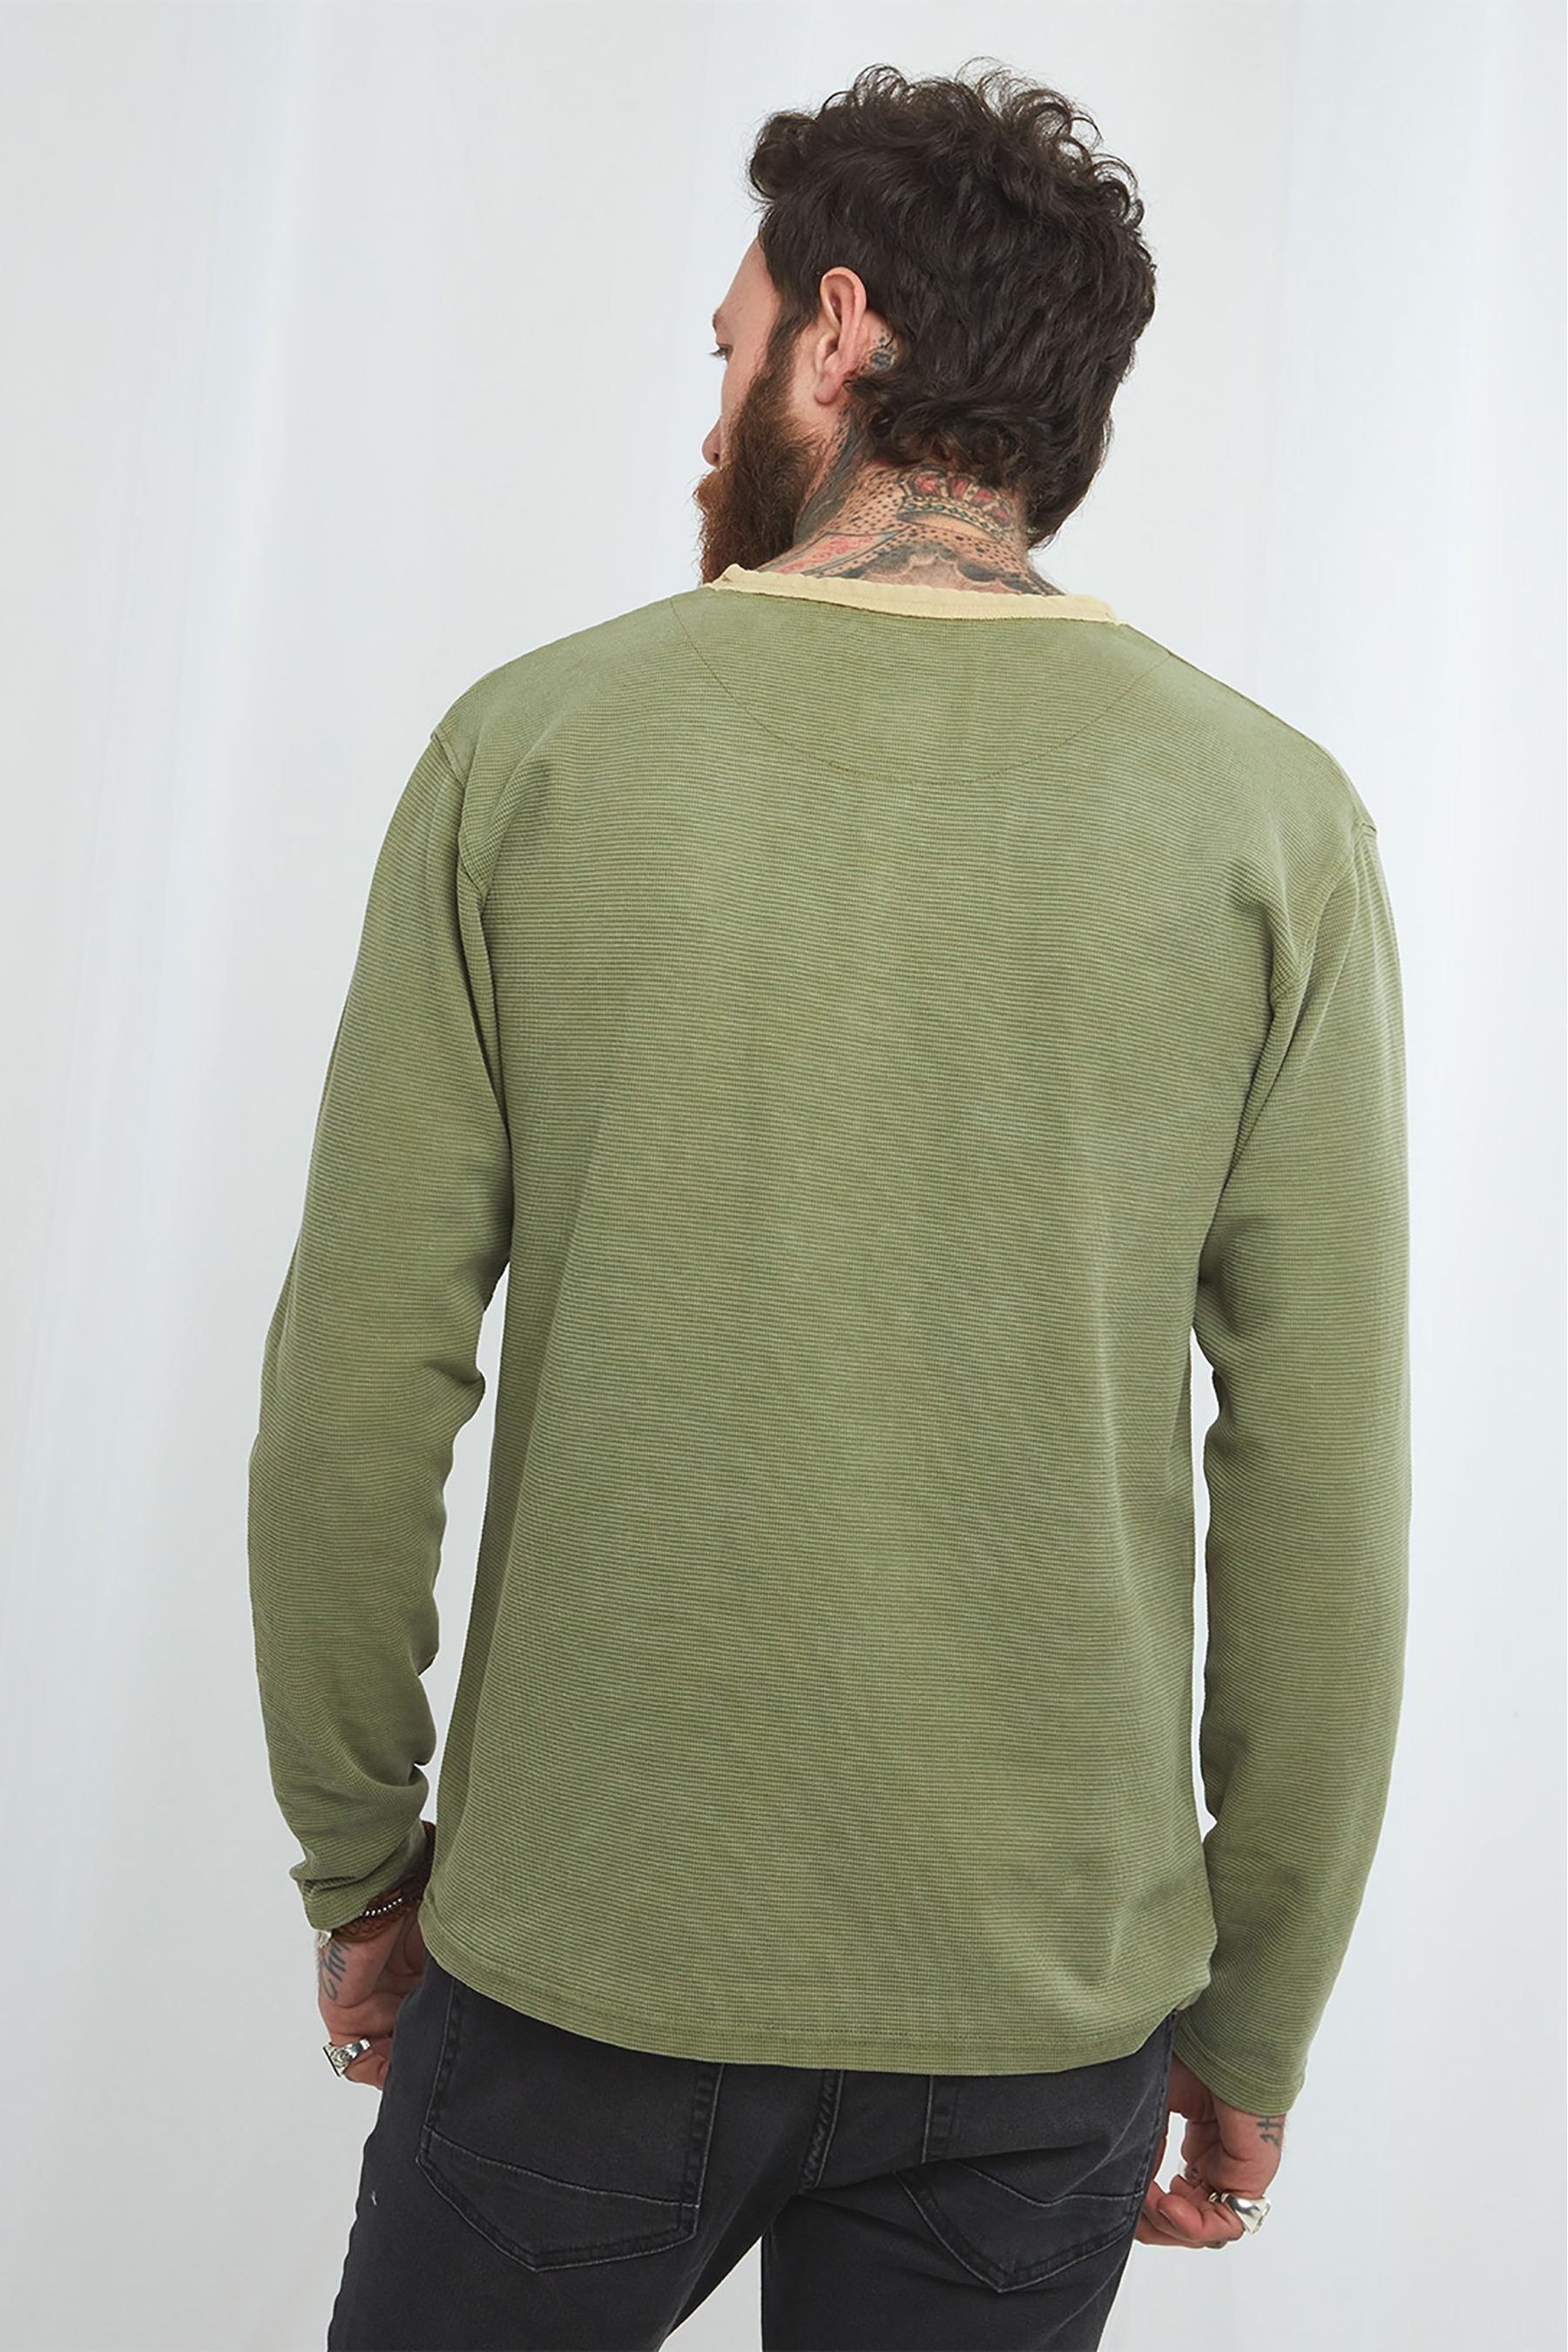 Buy Joe Browns Green Waffle Style Henley Top from the Next UK online shop